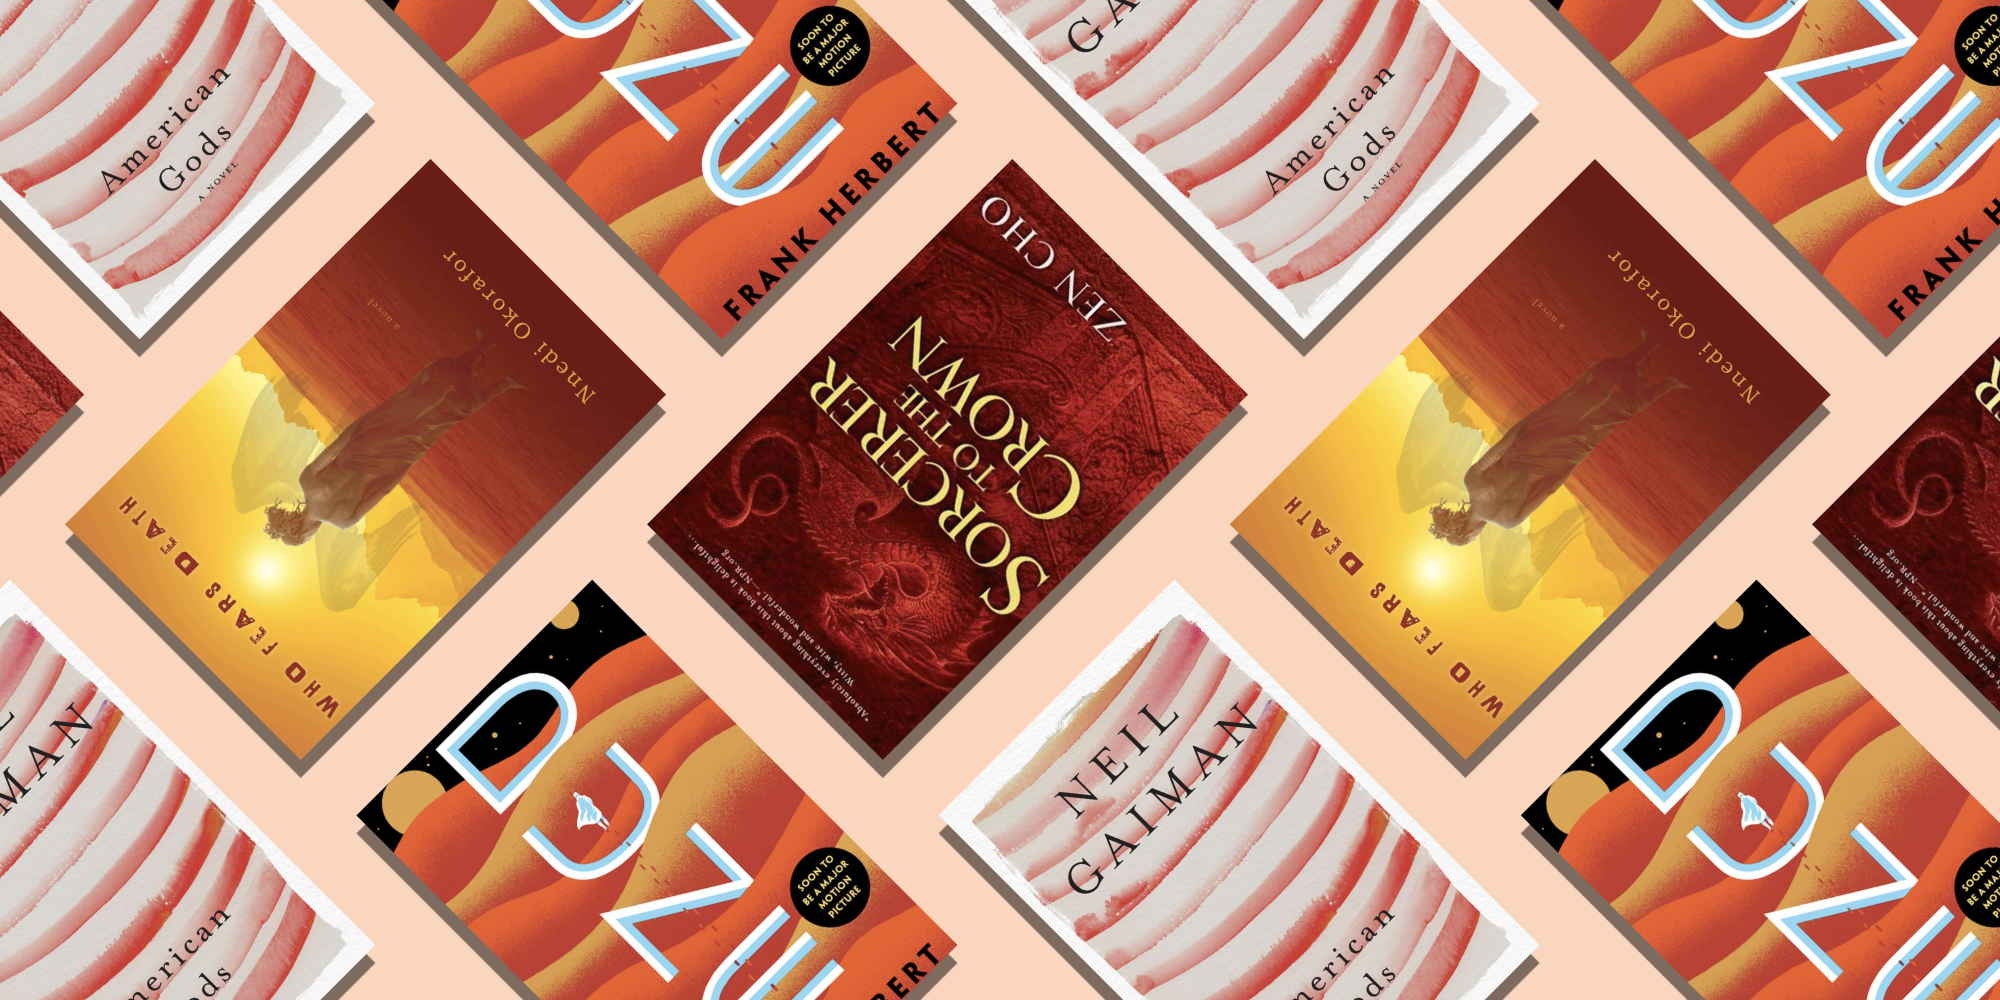 The Best Fantasy Books You Can't Put Down